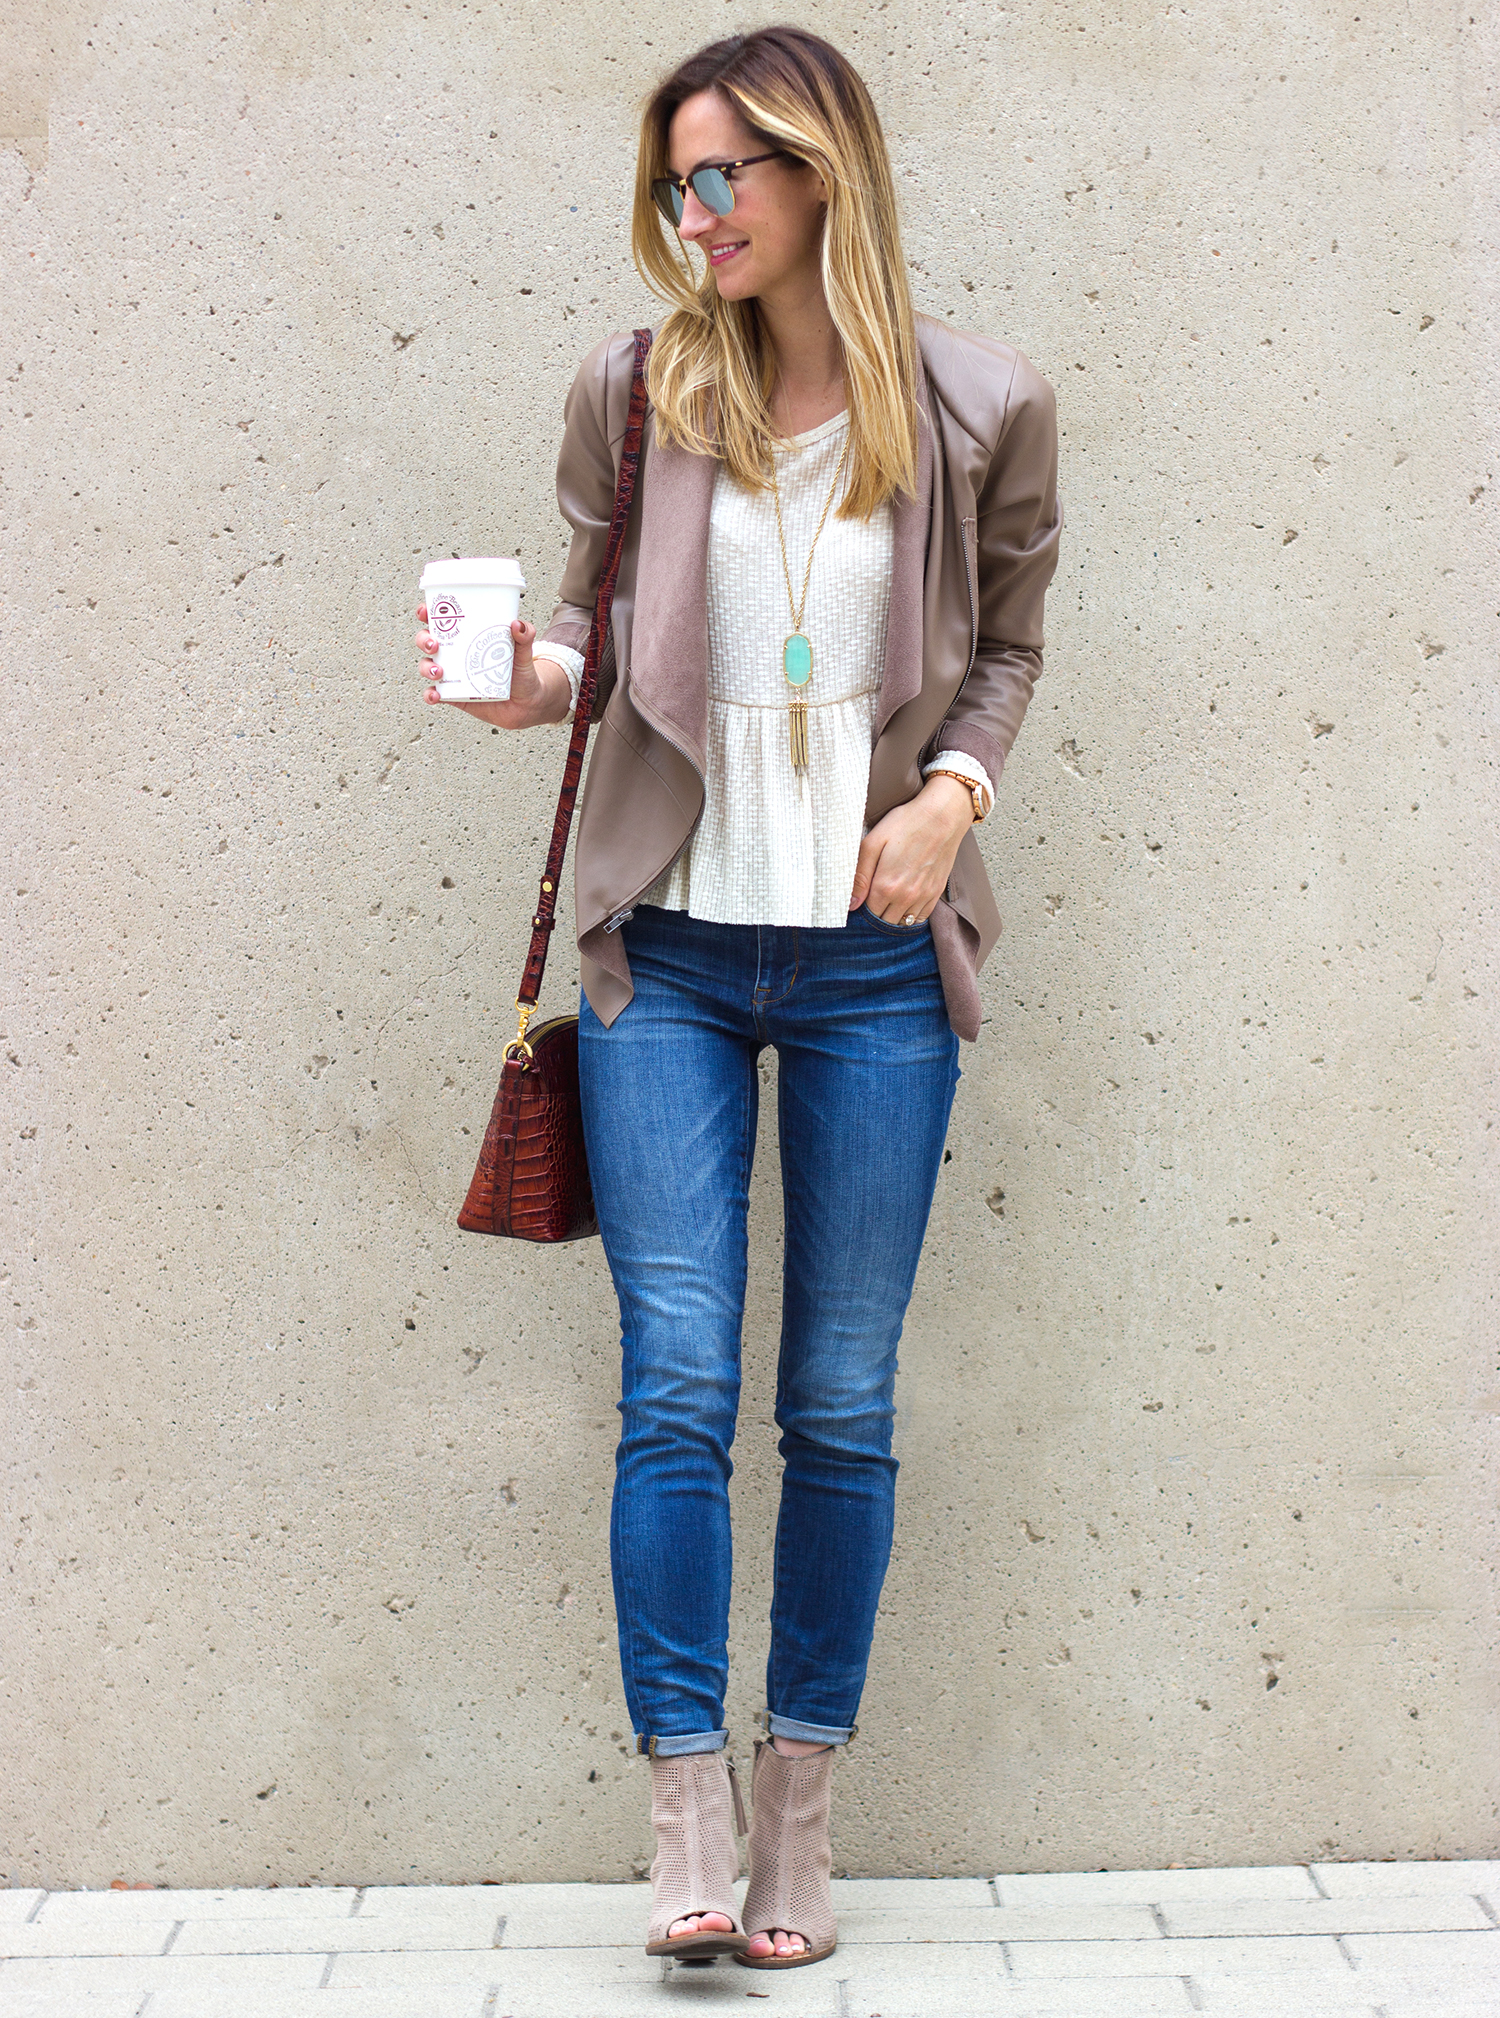 skinny jeans and booties outfits